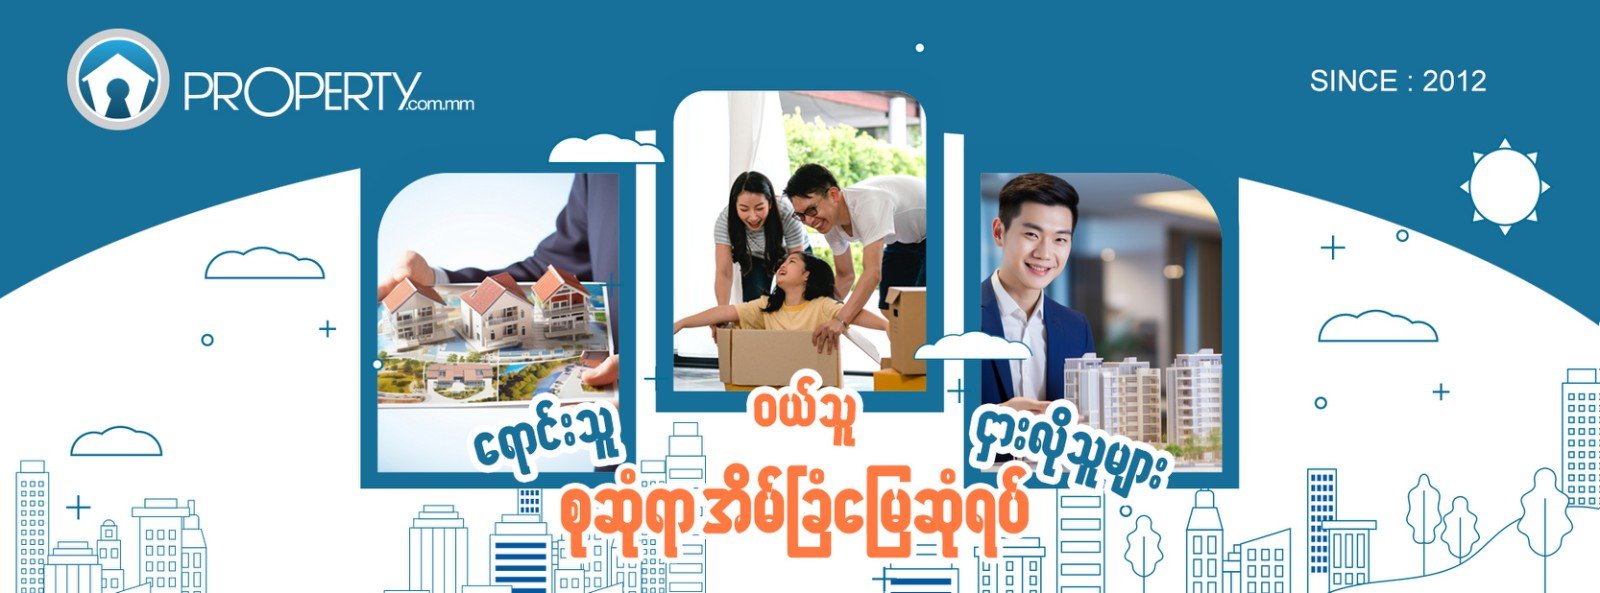 Myanmar's No. 1 Property Website  - Apartments, Condos, Houses, Lands in Yangon and other Regions